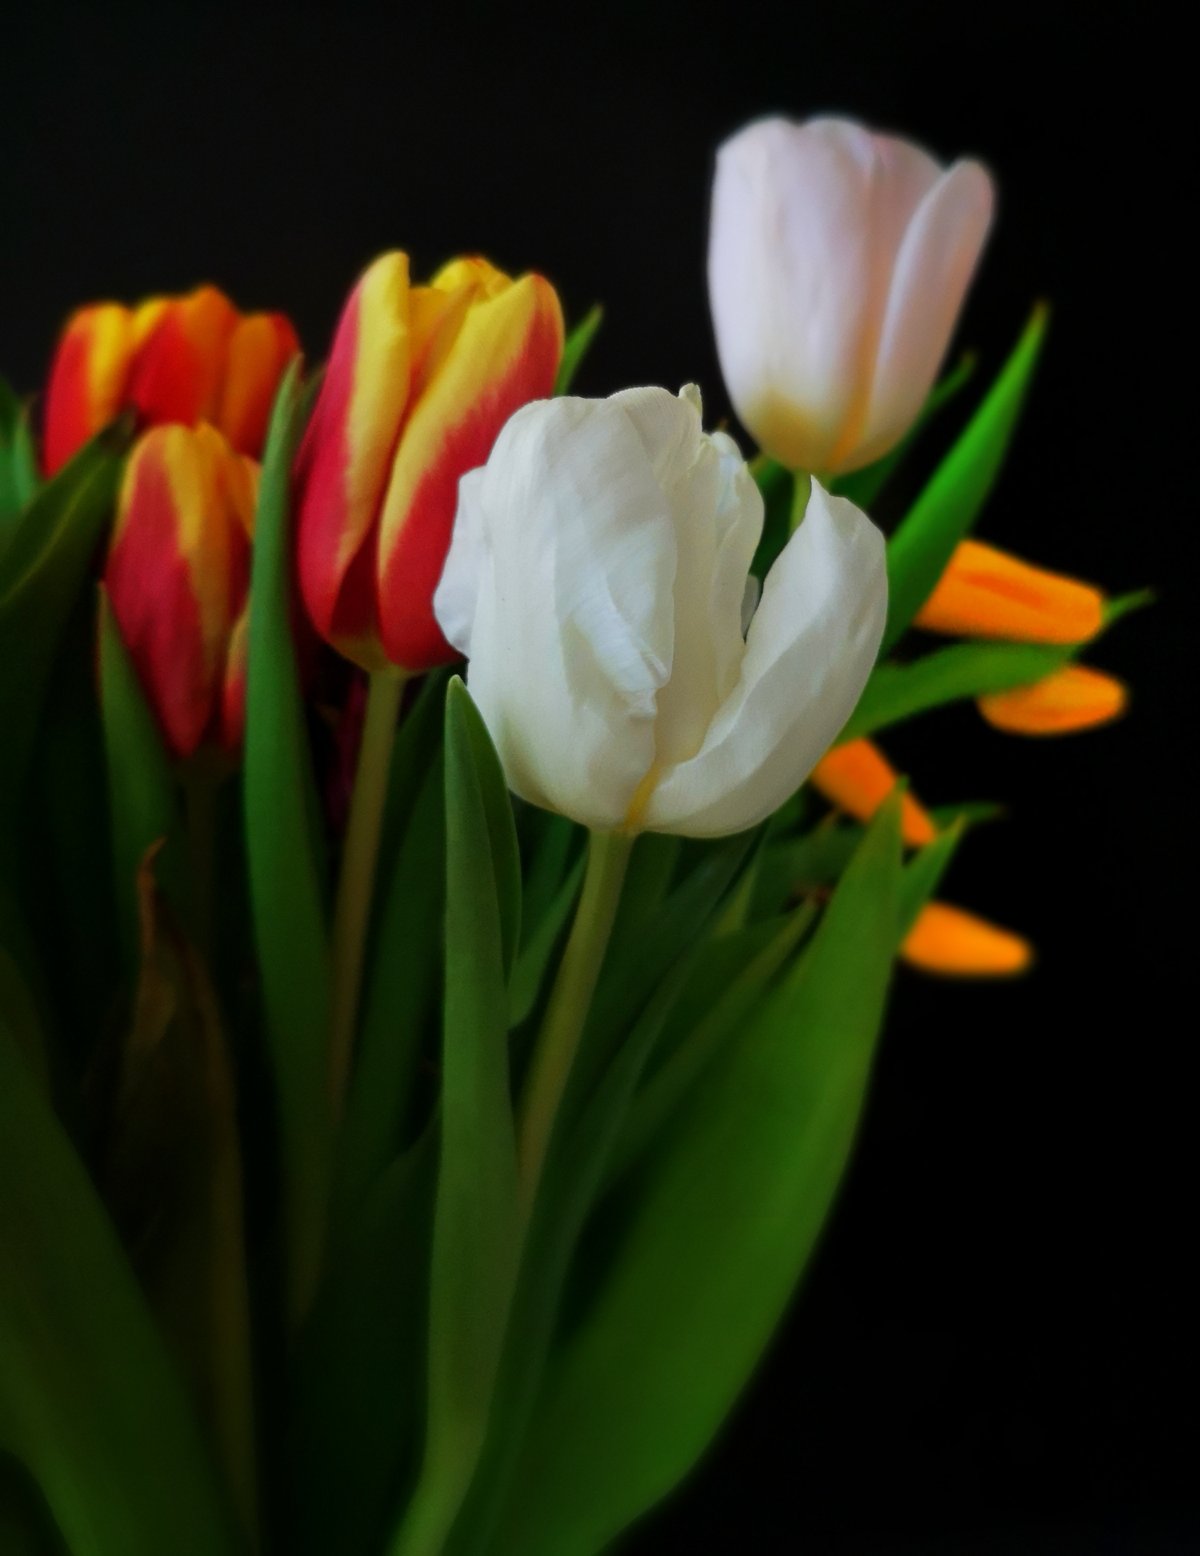 Pictures of blooming tulip flowers